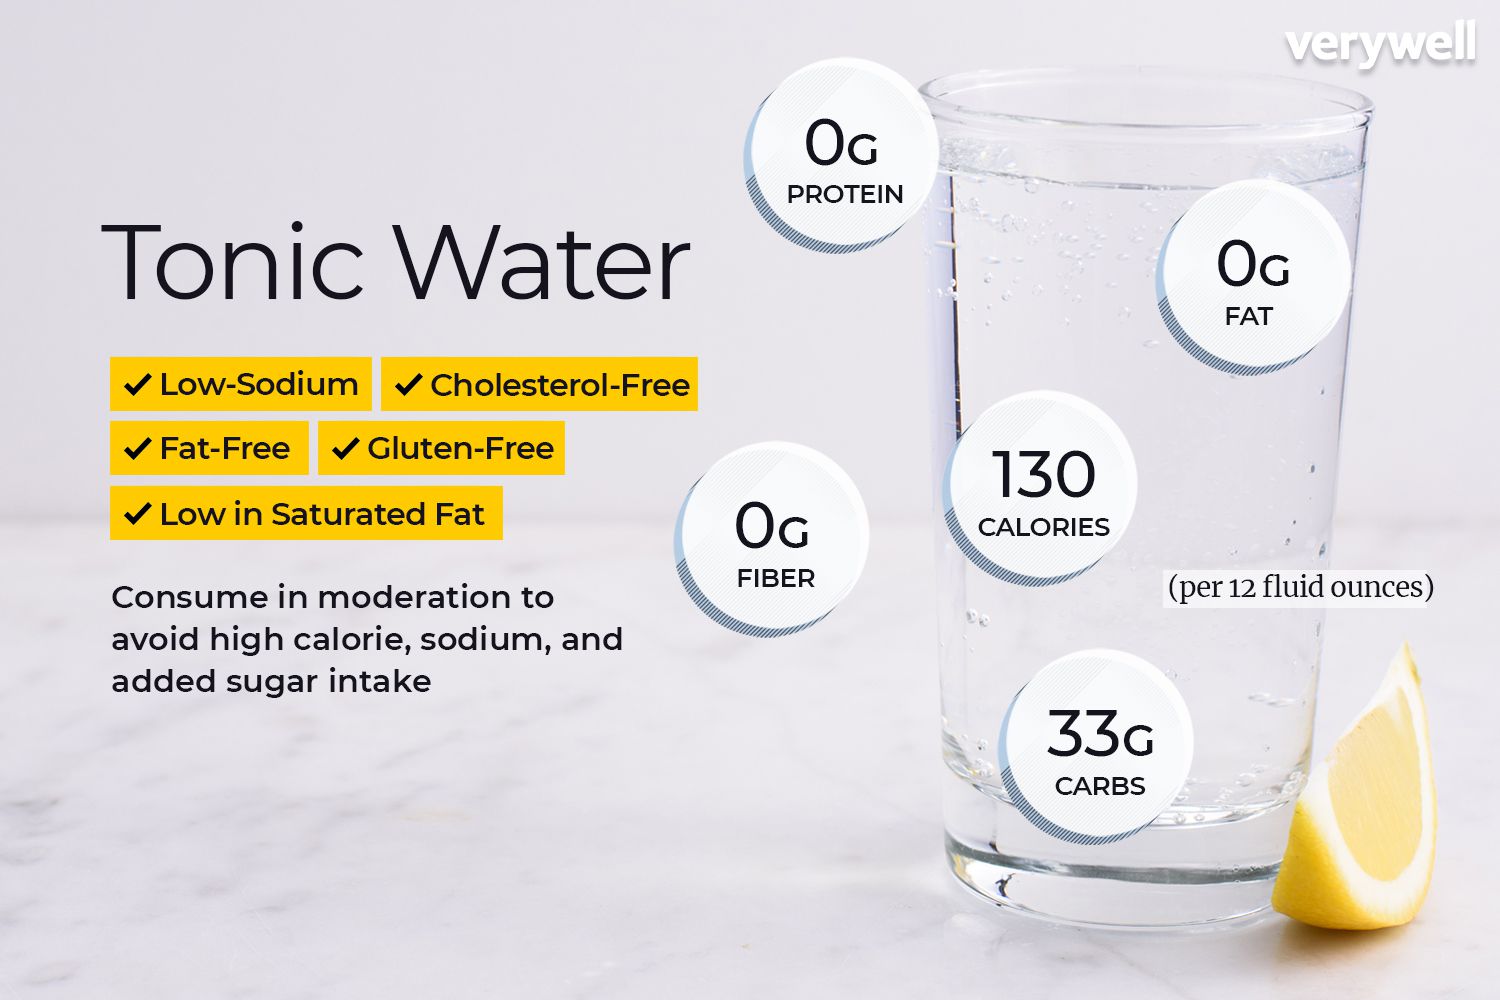 Nutrition Facts for Tonic Water